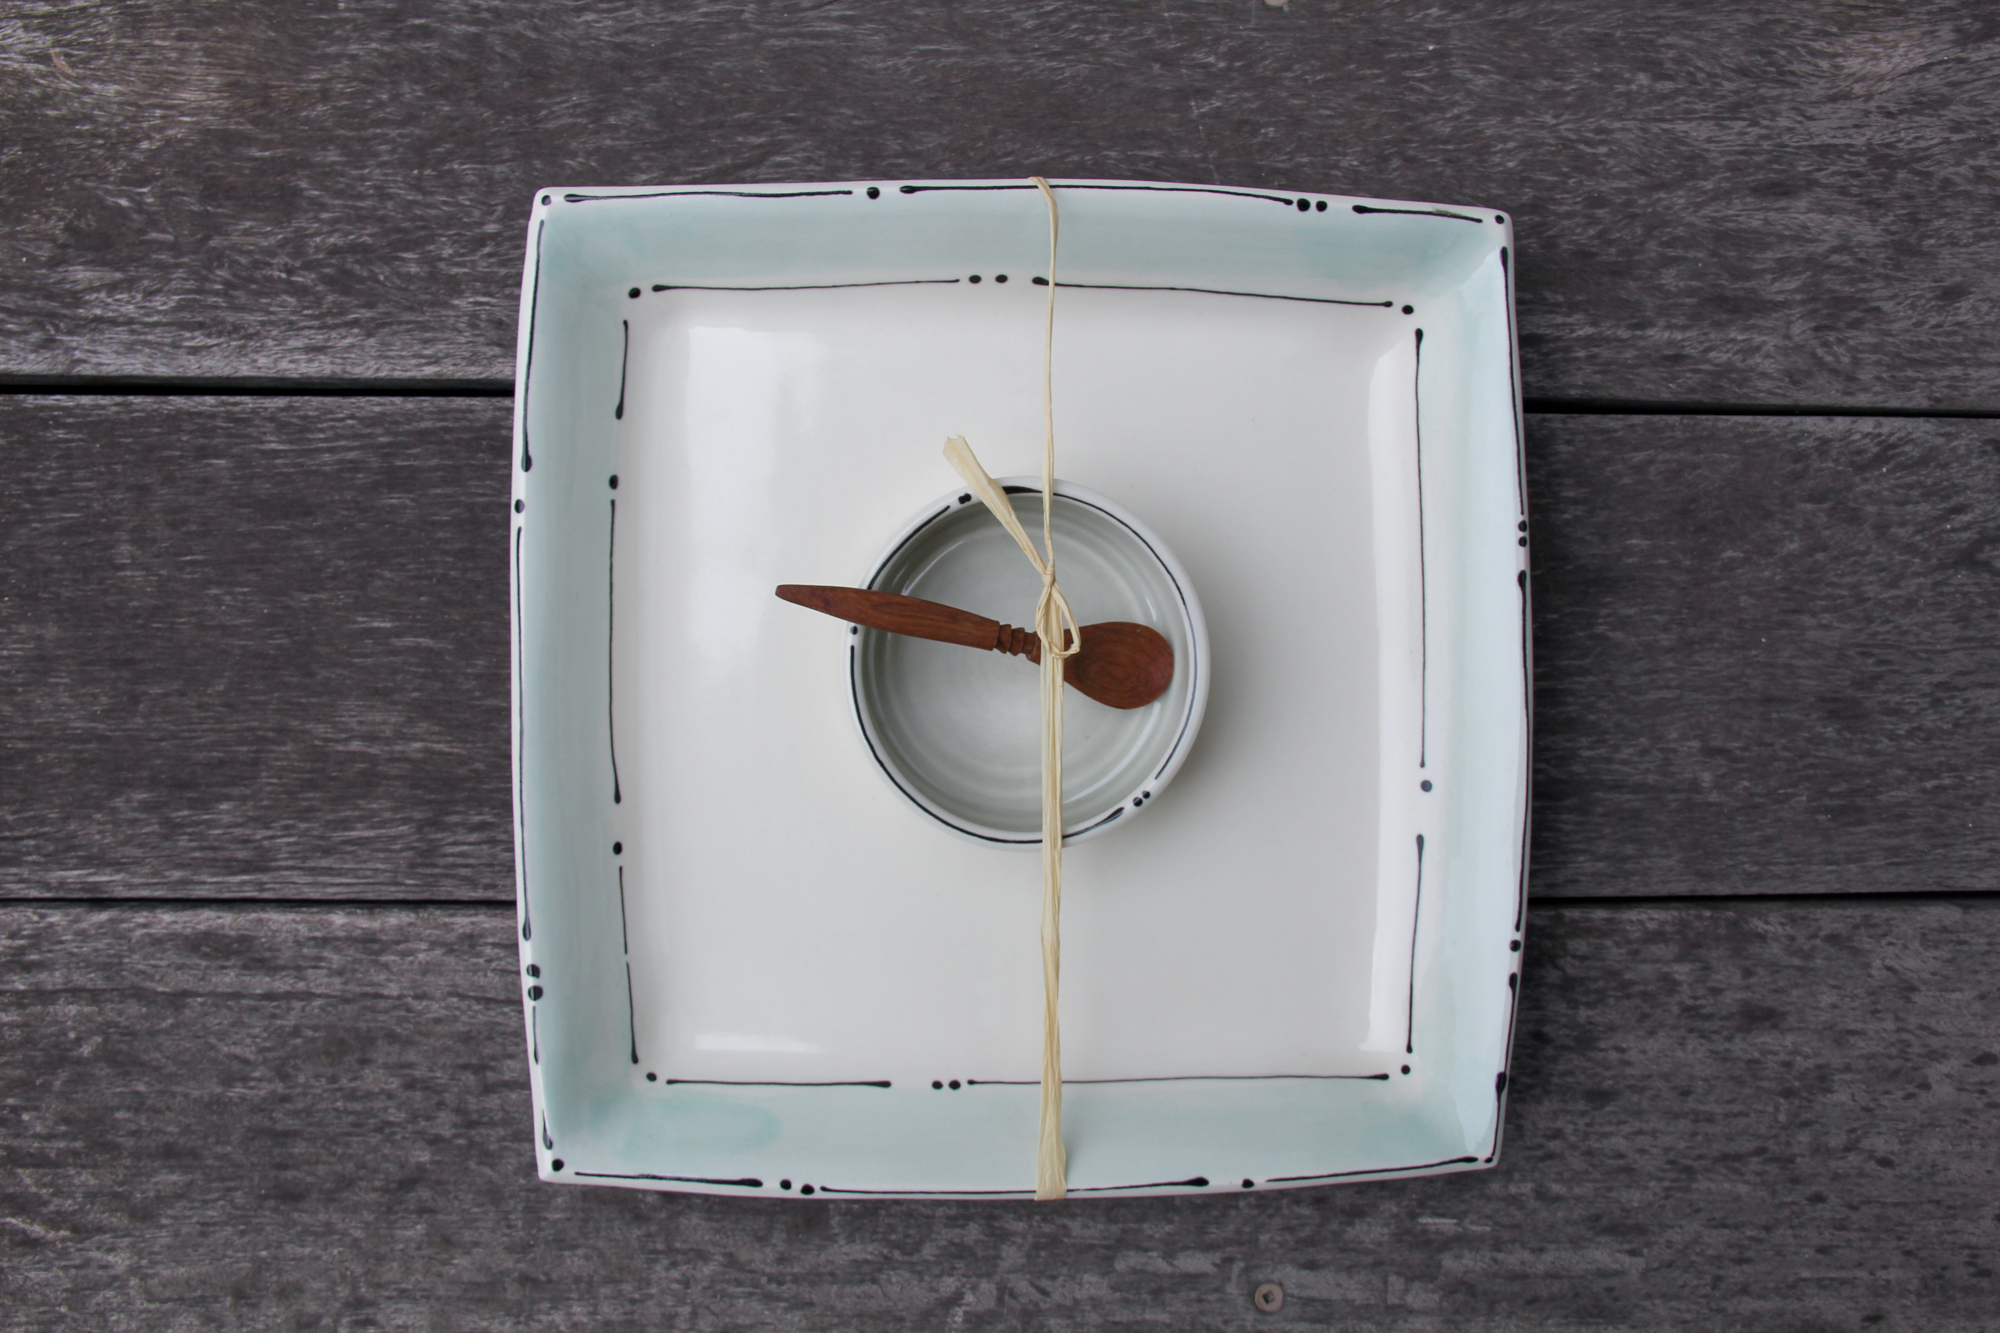 Iris Dorton: Medium Tray with Circle Dot Line Motif, comes with Wood Spoon and Dish Product Image 9 of 11